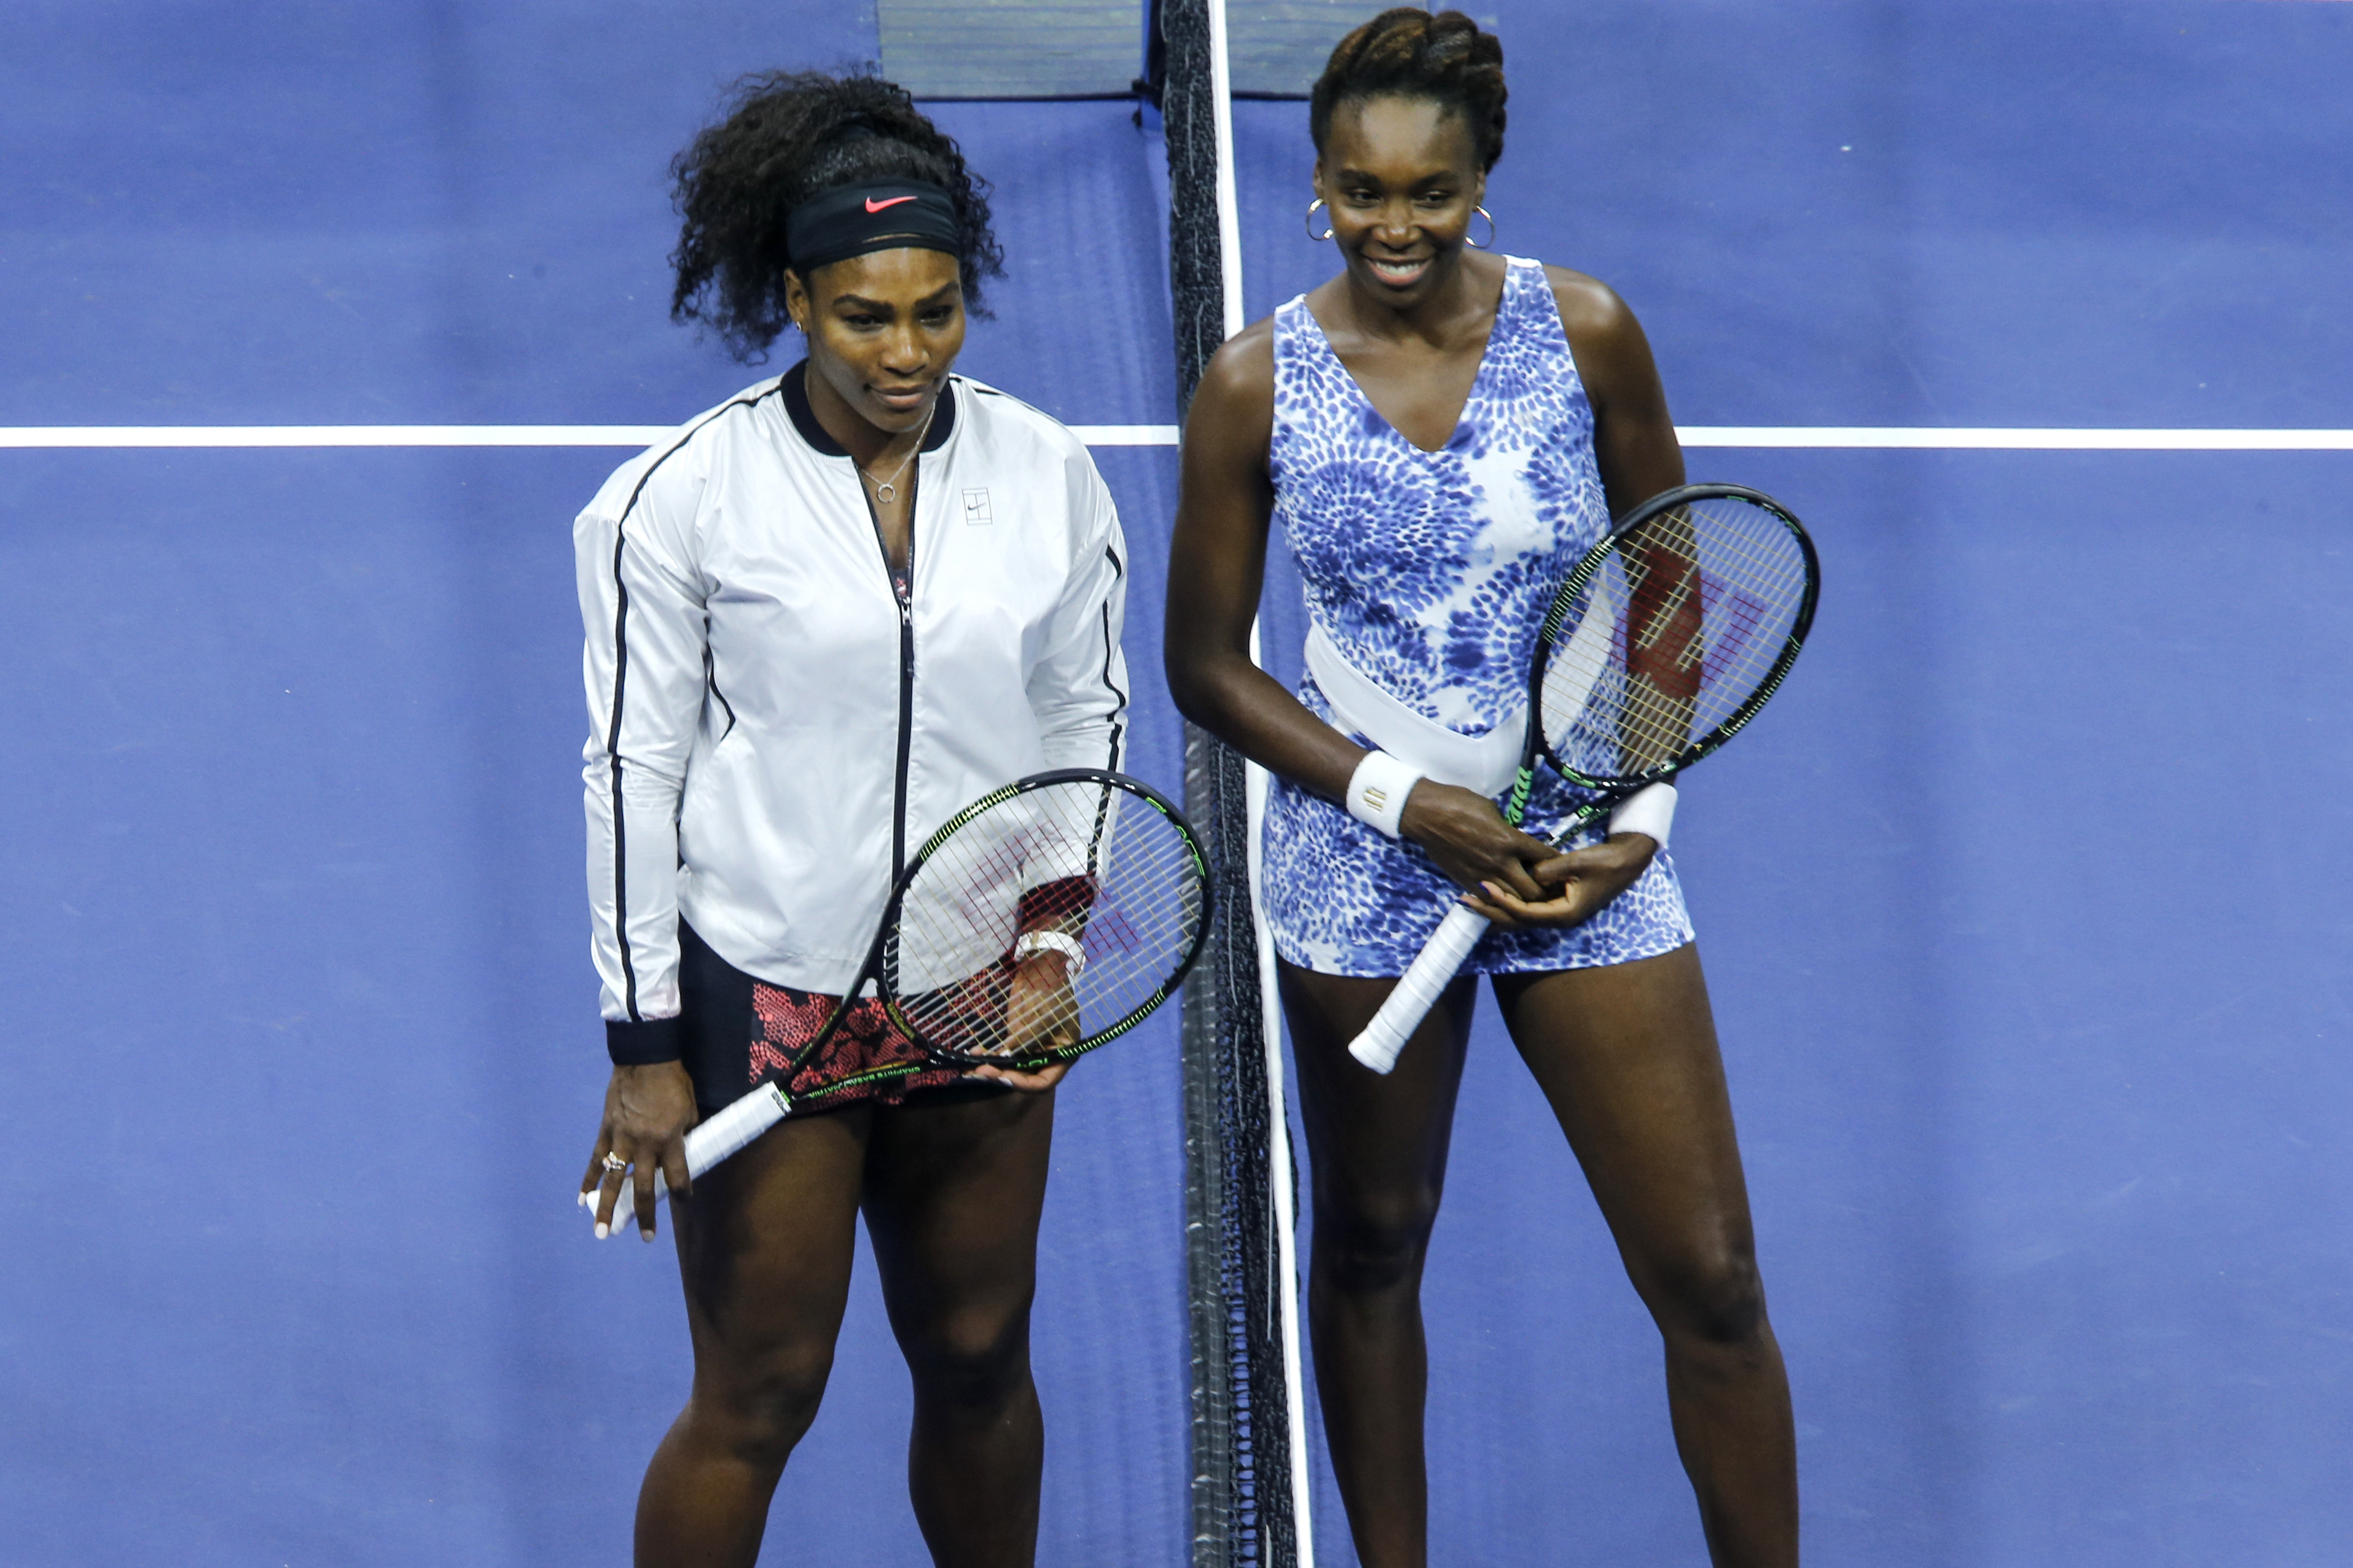 Venus Williams ( R ) and Serena Williams ( L) pose for a picture before their 2015 US Open Women's Singles Quarterfinals match at the USTA Billie Jean King National Tennis Center September 8, 2015 in New York. AFP PHOTO/KENA BETANCUR / AFP PHOTO / KENA BETANCUR